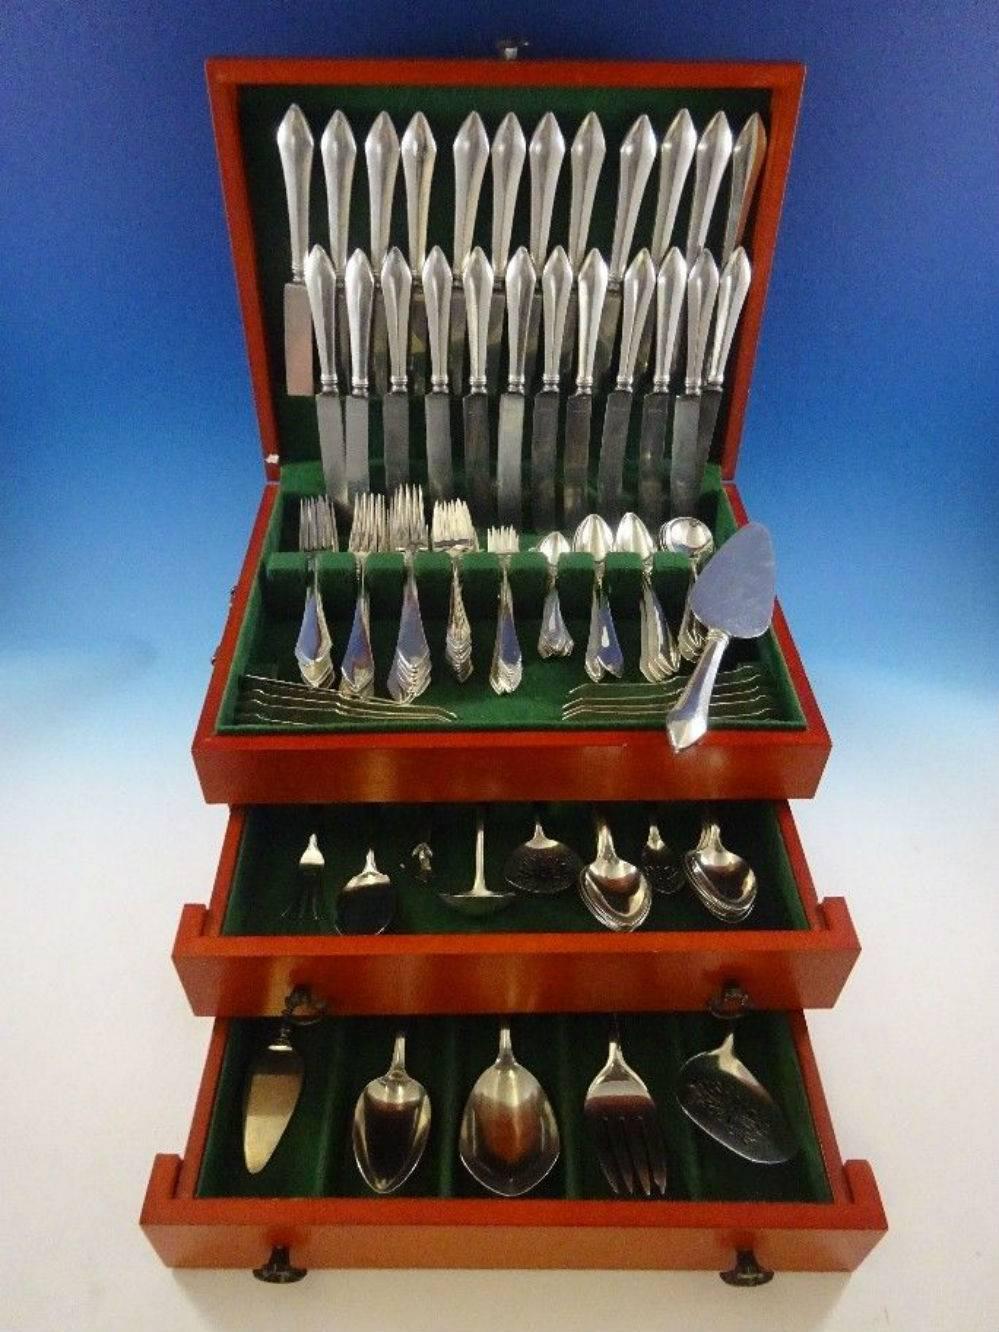 Monumental dinner & Luncheon Chatham by Durgin sterling silver flatware set - 132 pieces. This set includes:

12 dinner size knives 9 5/8